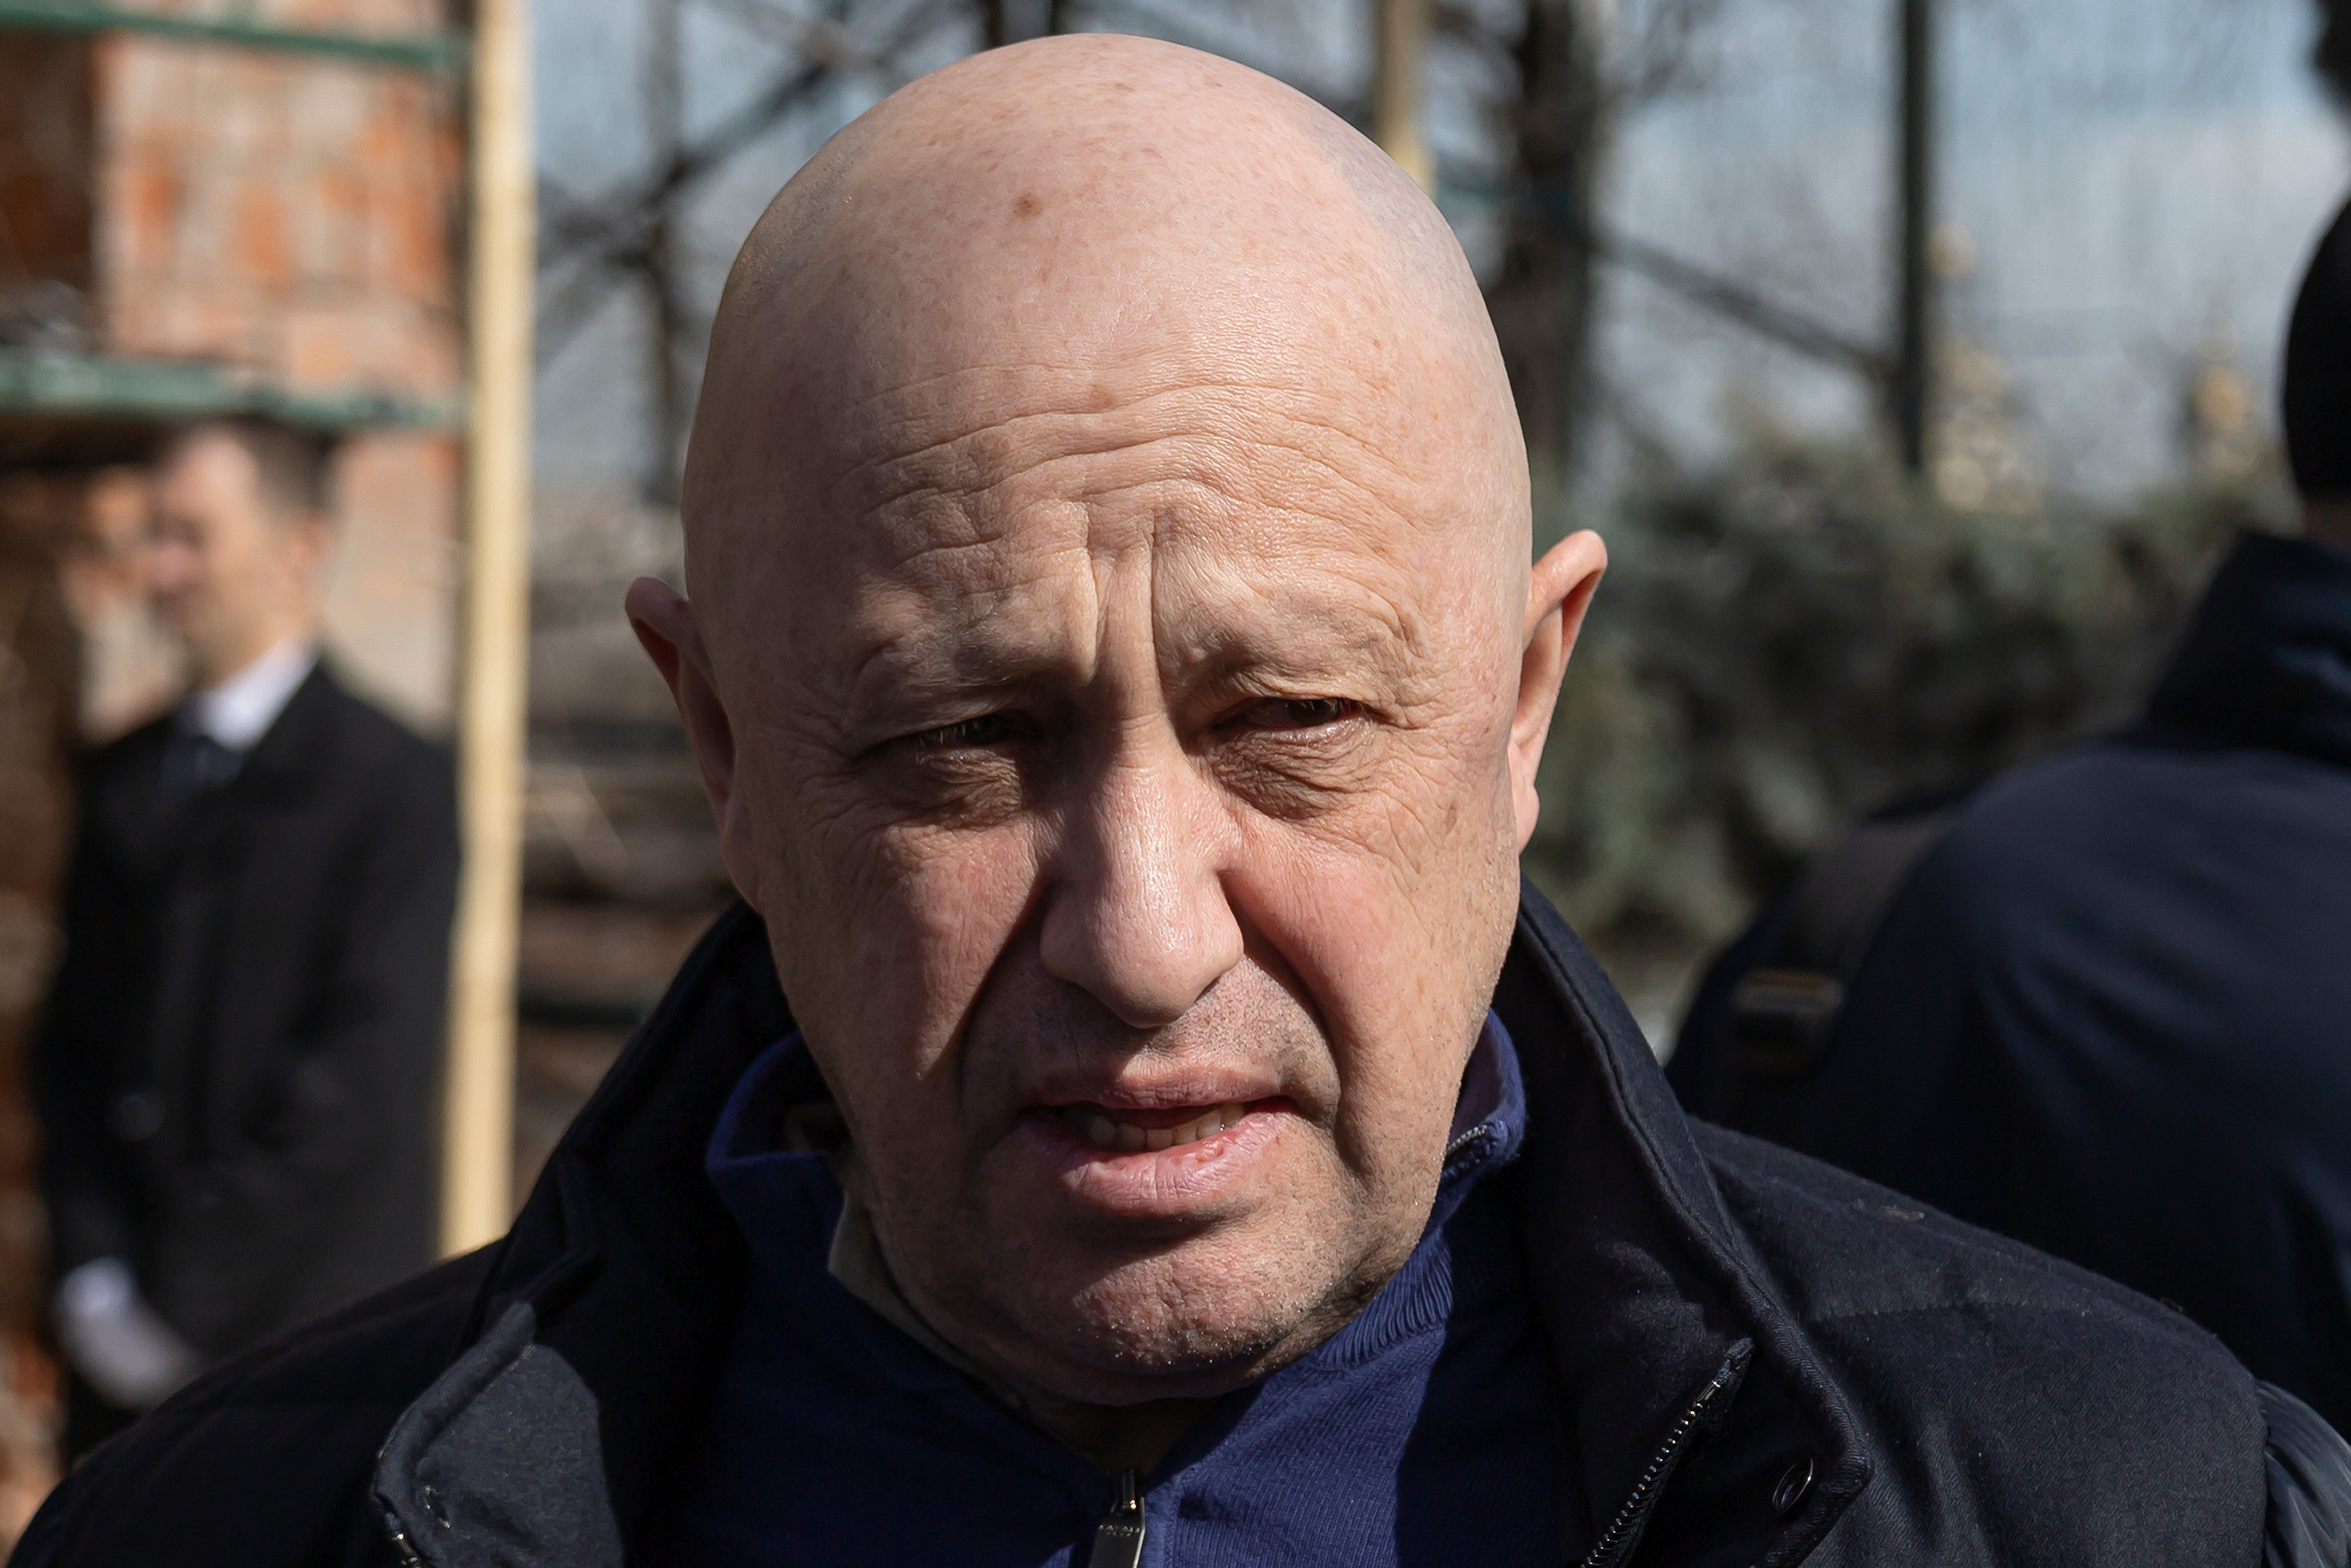 Yevgeny Prigozhin, the owner of the Wagner Group military company, arrives during a funeral ceremony at the Troyekurovskoye cemetery in Moscow, Russia, on April 8, 2023.